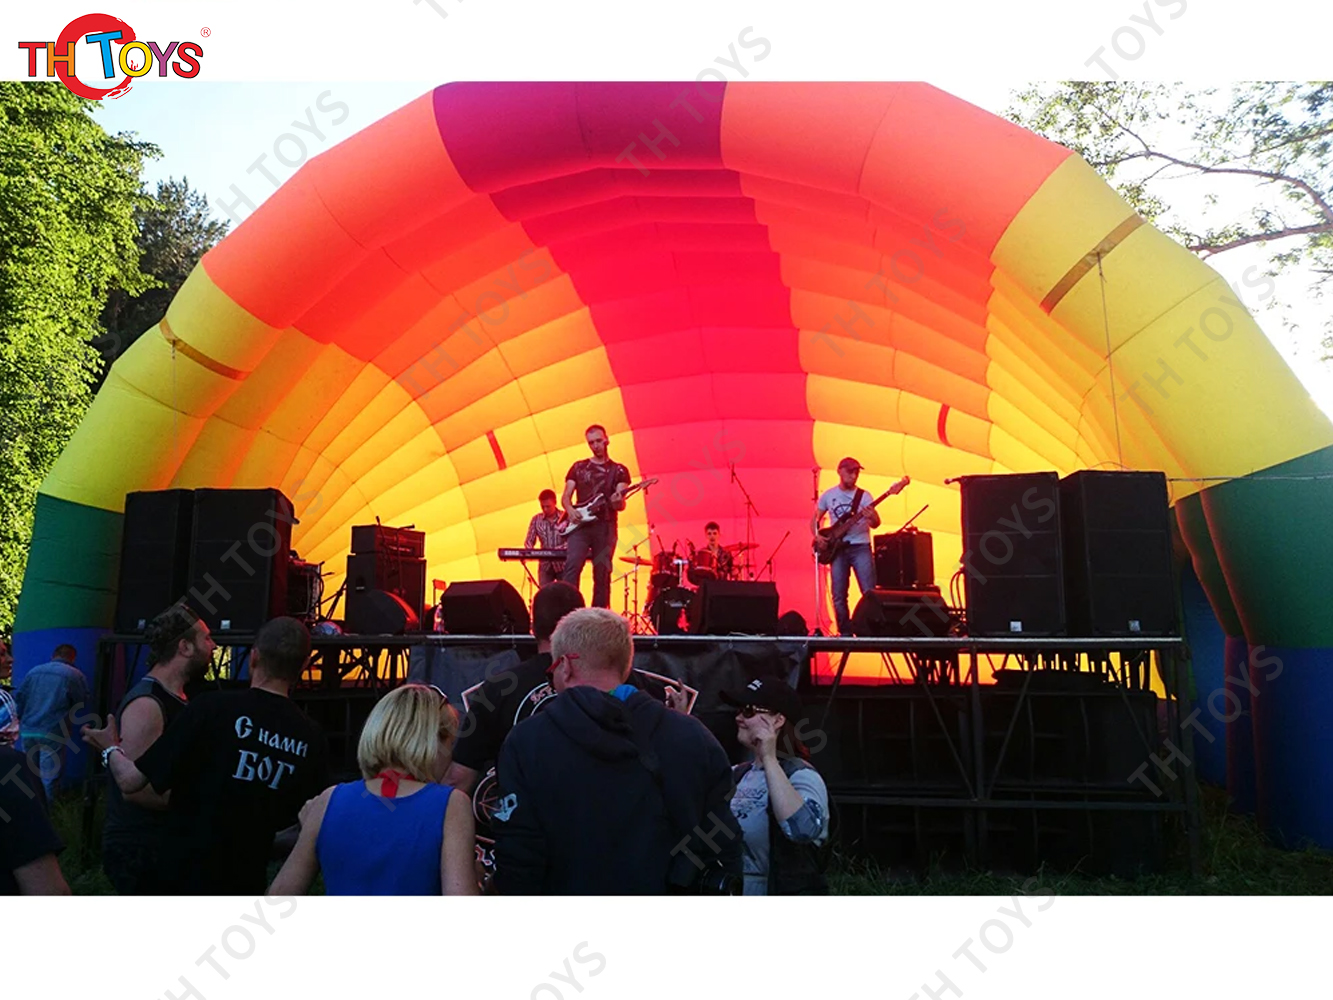 outdoor big inflatable shell tent, portable inflatable stage tent, rainbow color inflatable eventtent